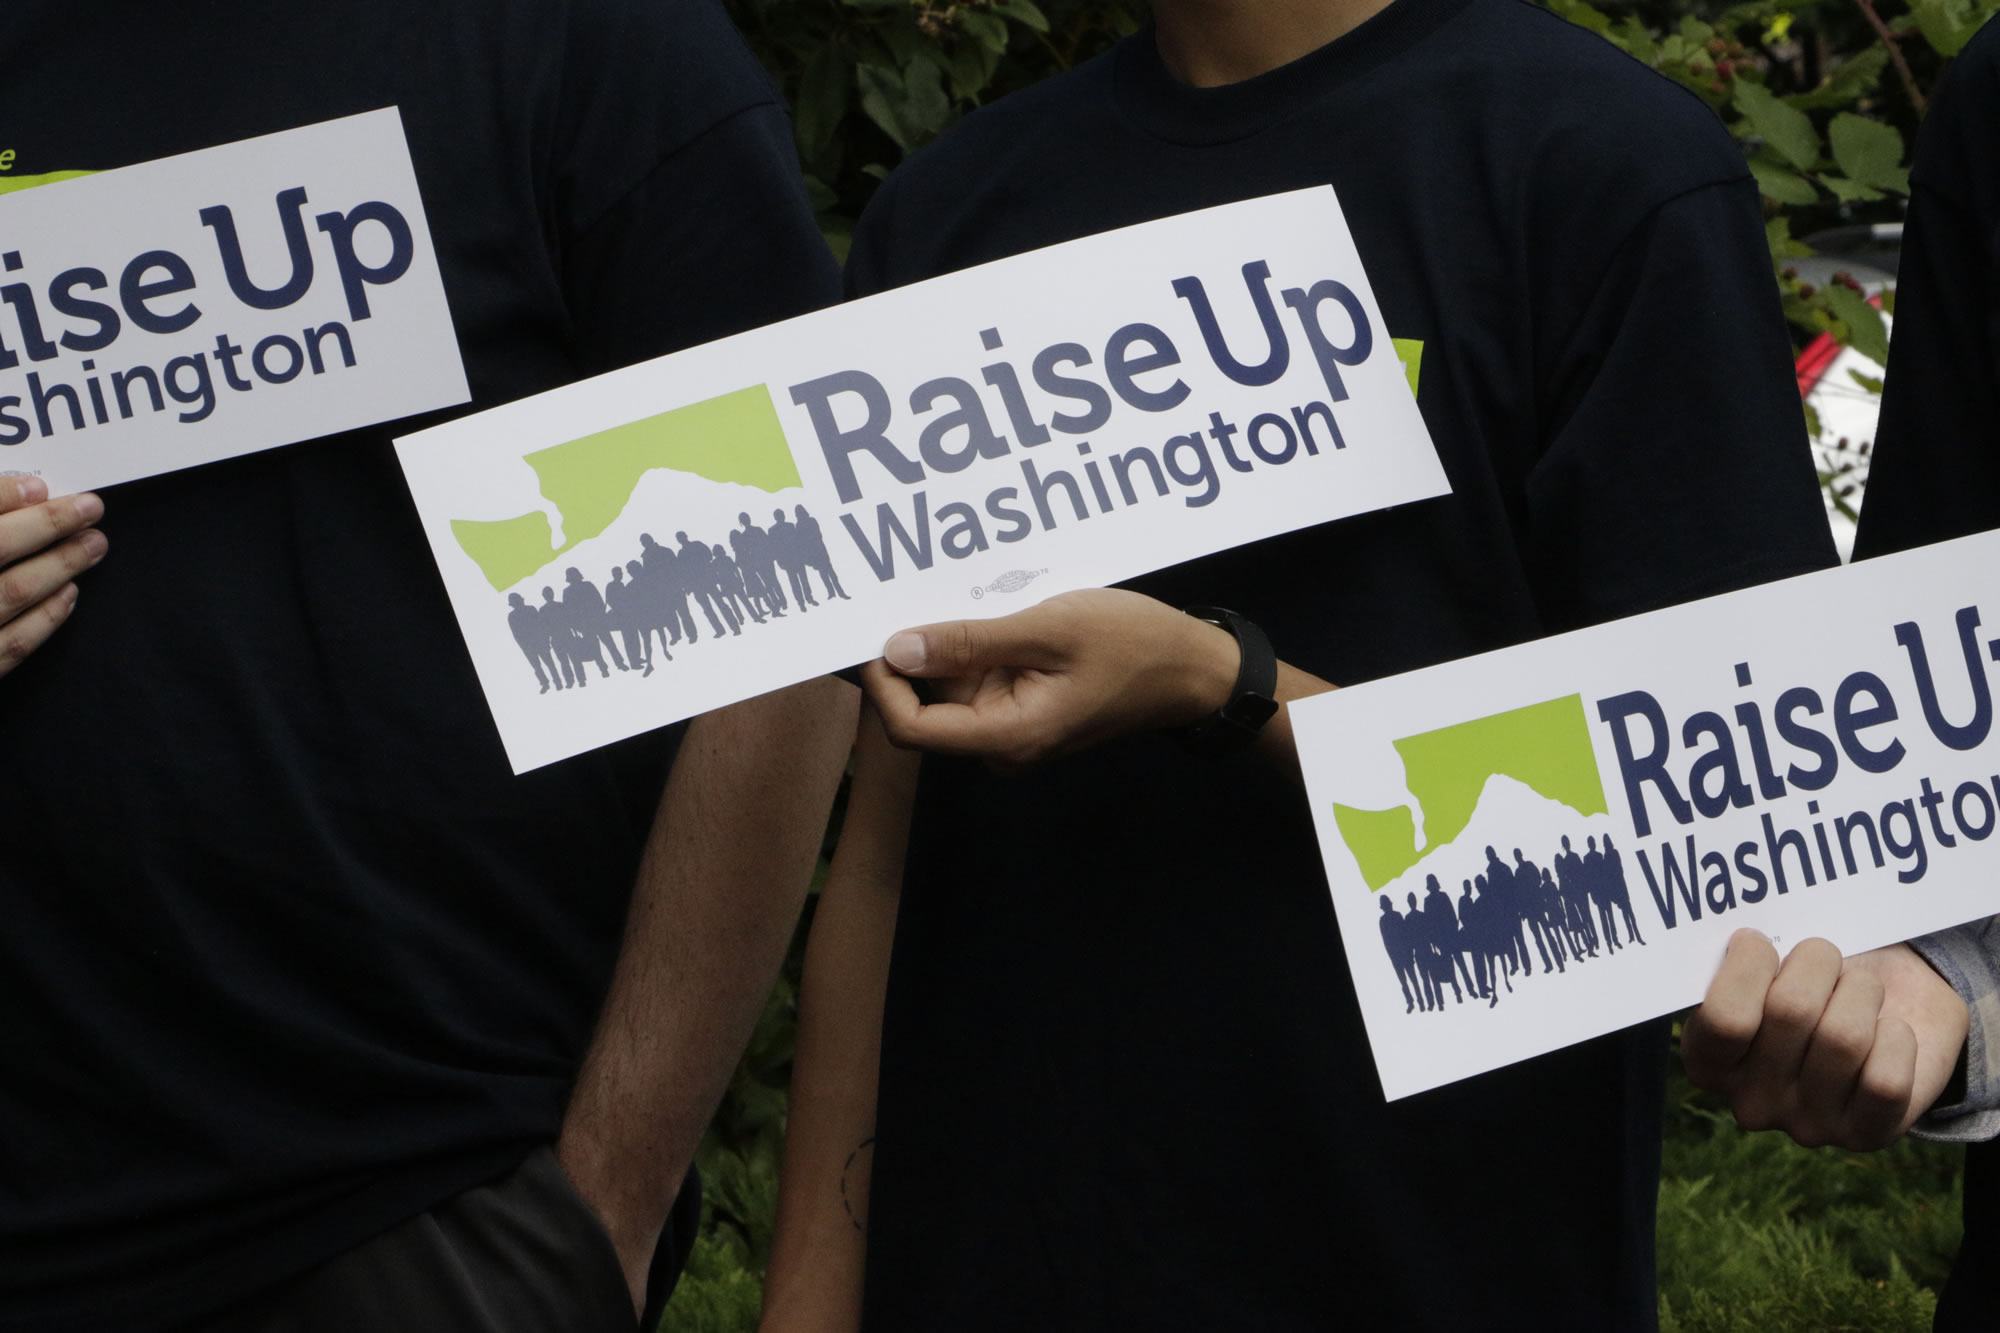 Supporters of raising the state minimum wage hold signs at a news conference, in 2016 in Olympia. Initiative 1433, approved by votes, incrementally increases the state's rate over the next four years to $13.50 an hour and to provide paid sick leave to employees who don't currently have it.